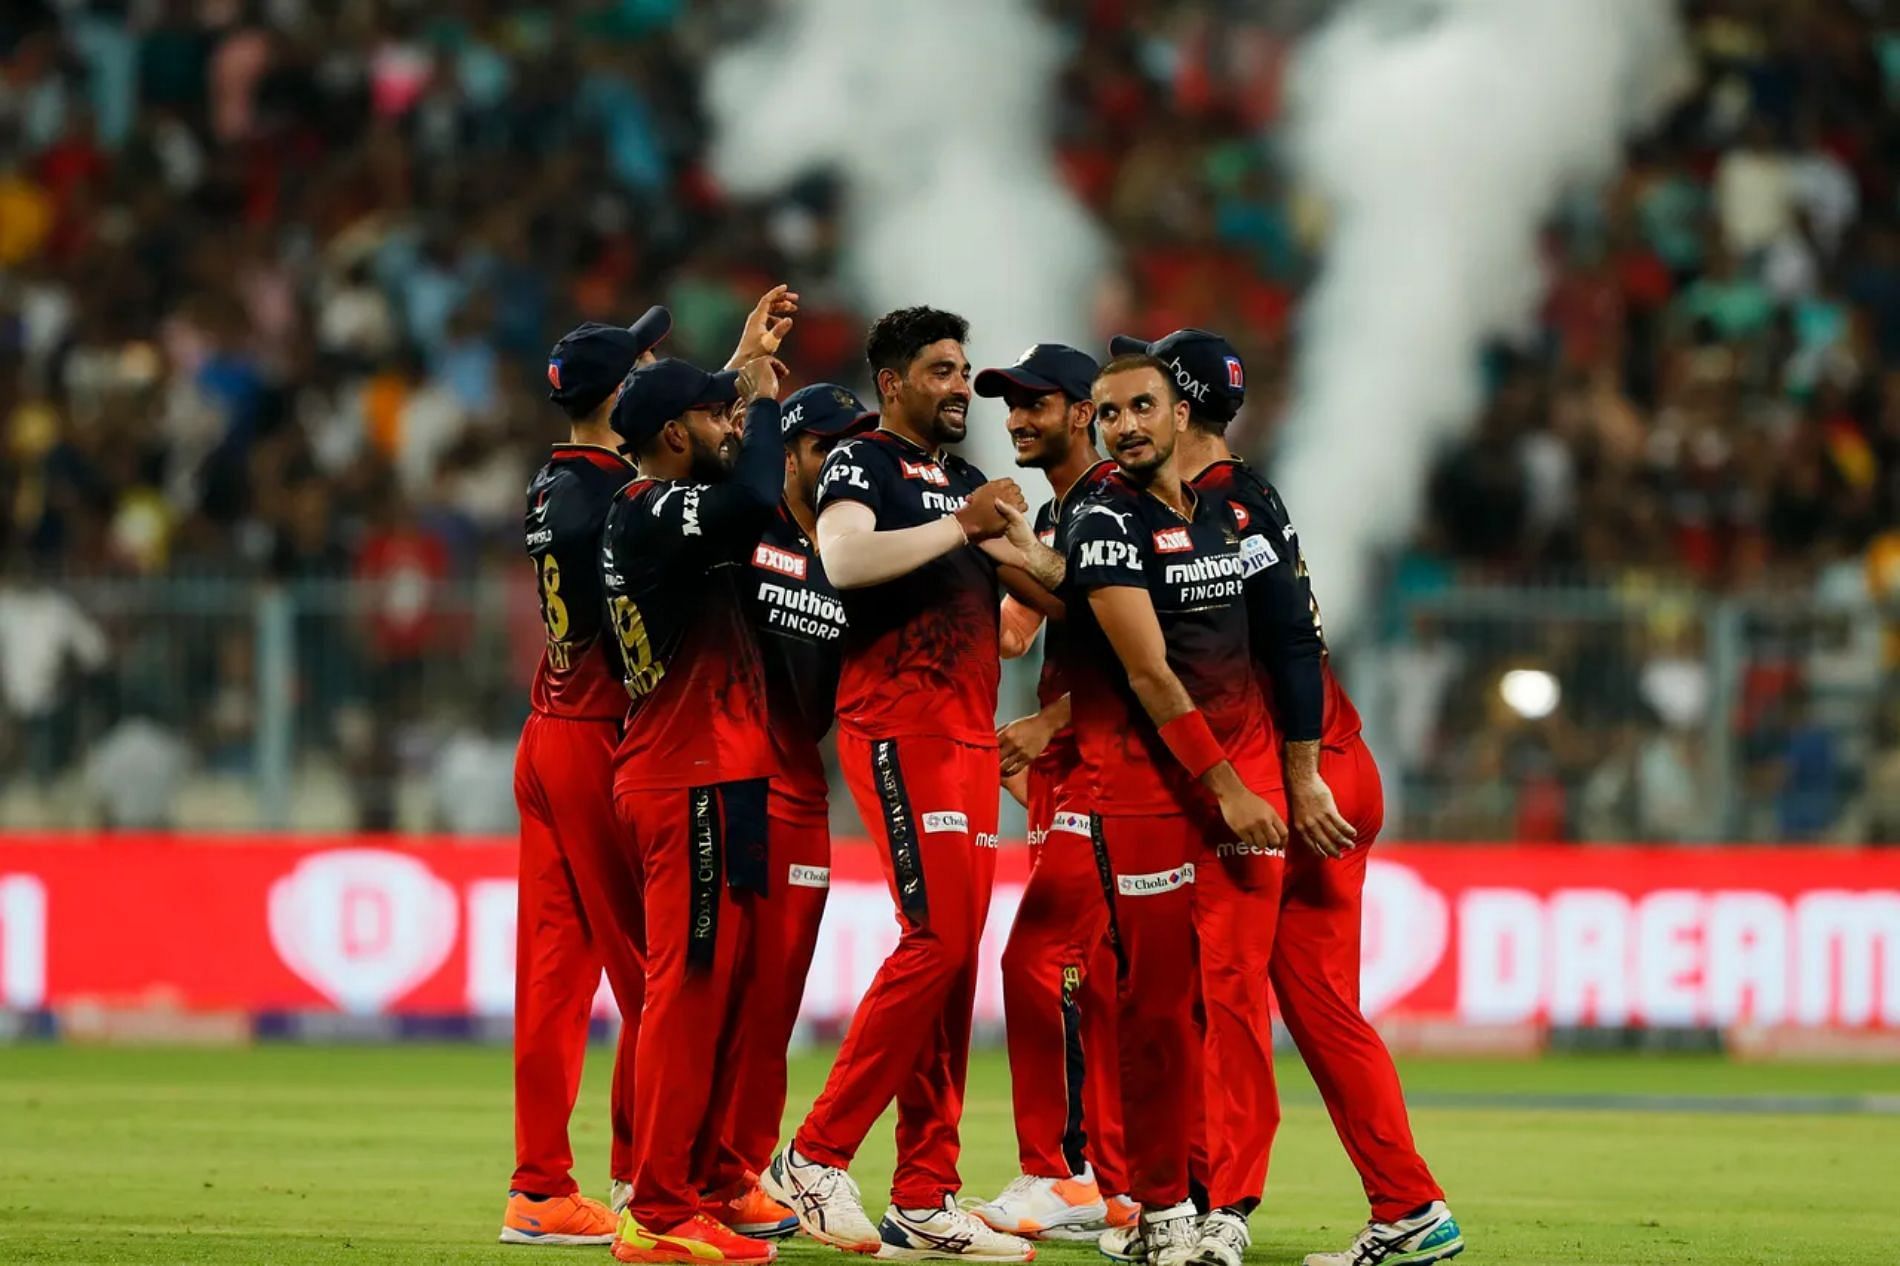 The IPL has attracted new audiences to the game of cricket [P/C: iplt20.com]